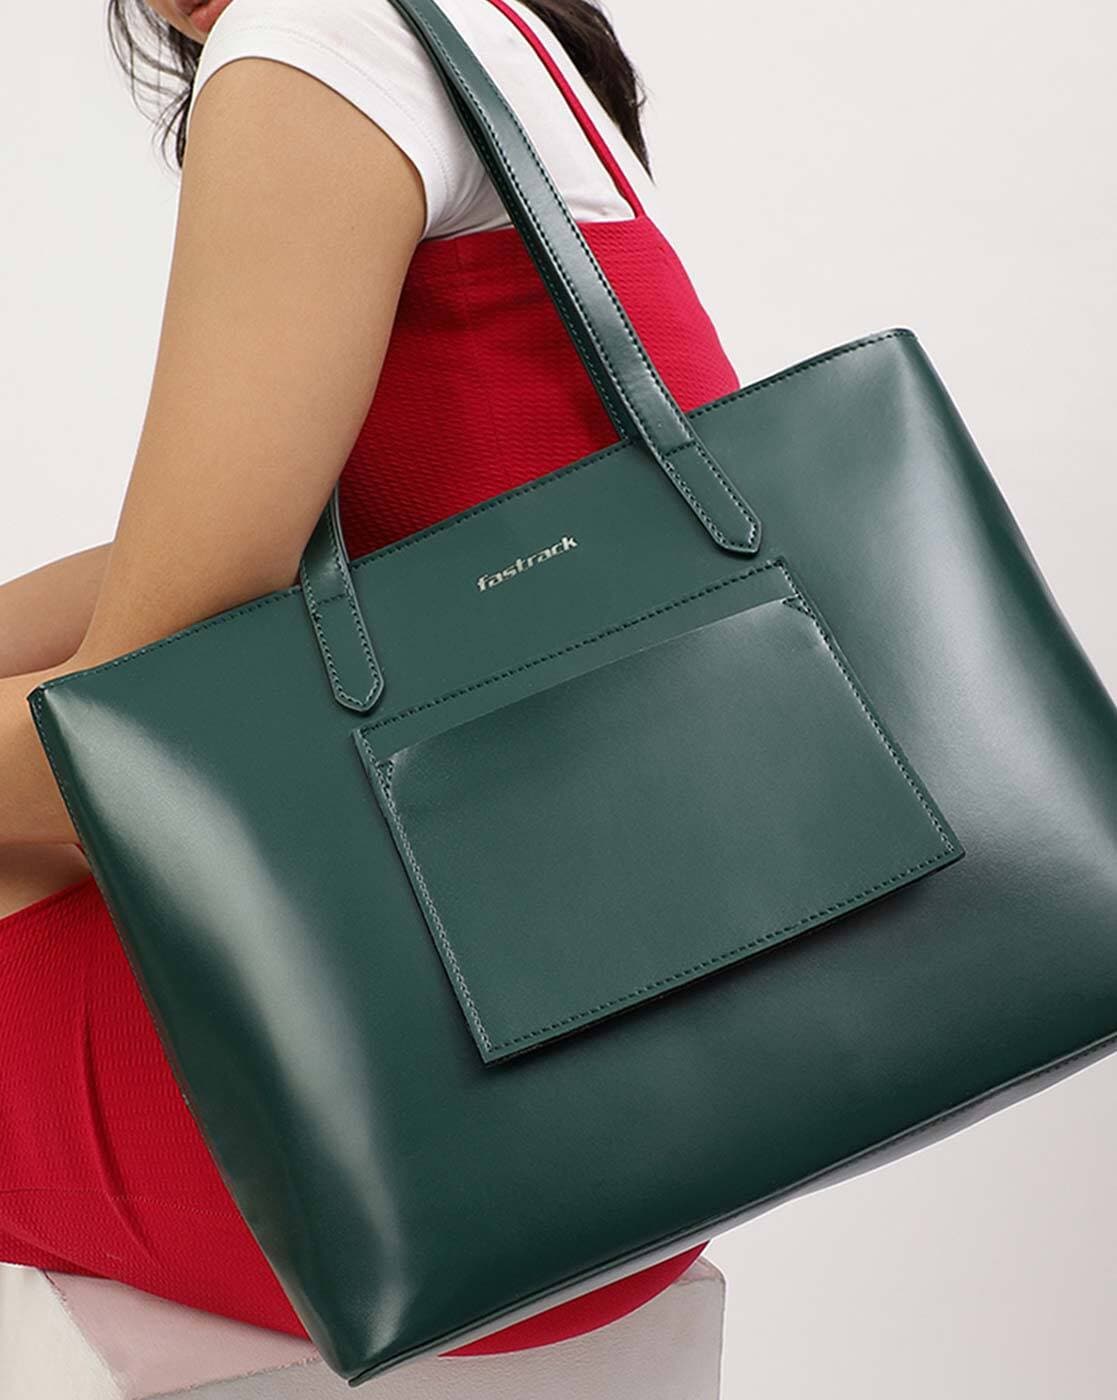 Green Tote Bags for Women | Nordstrom